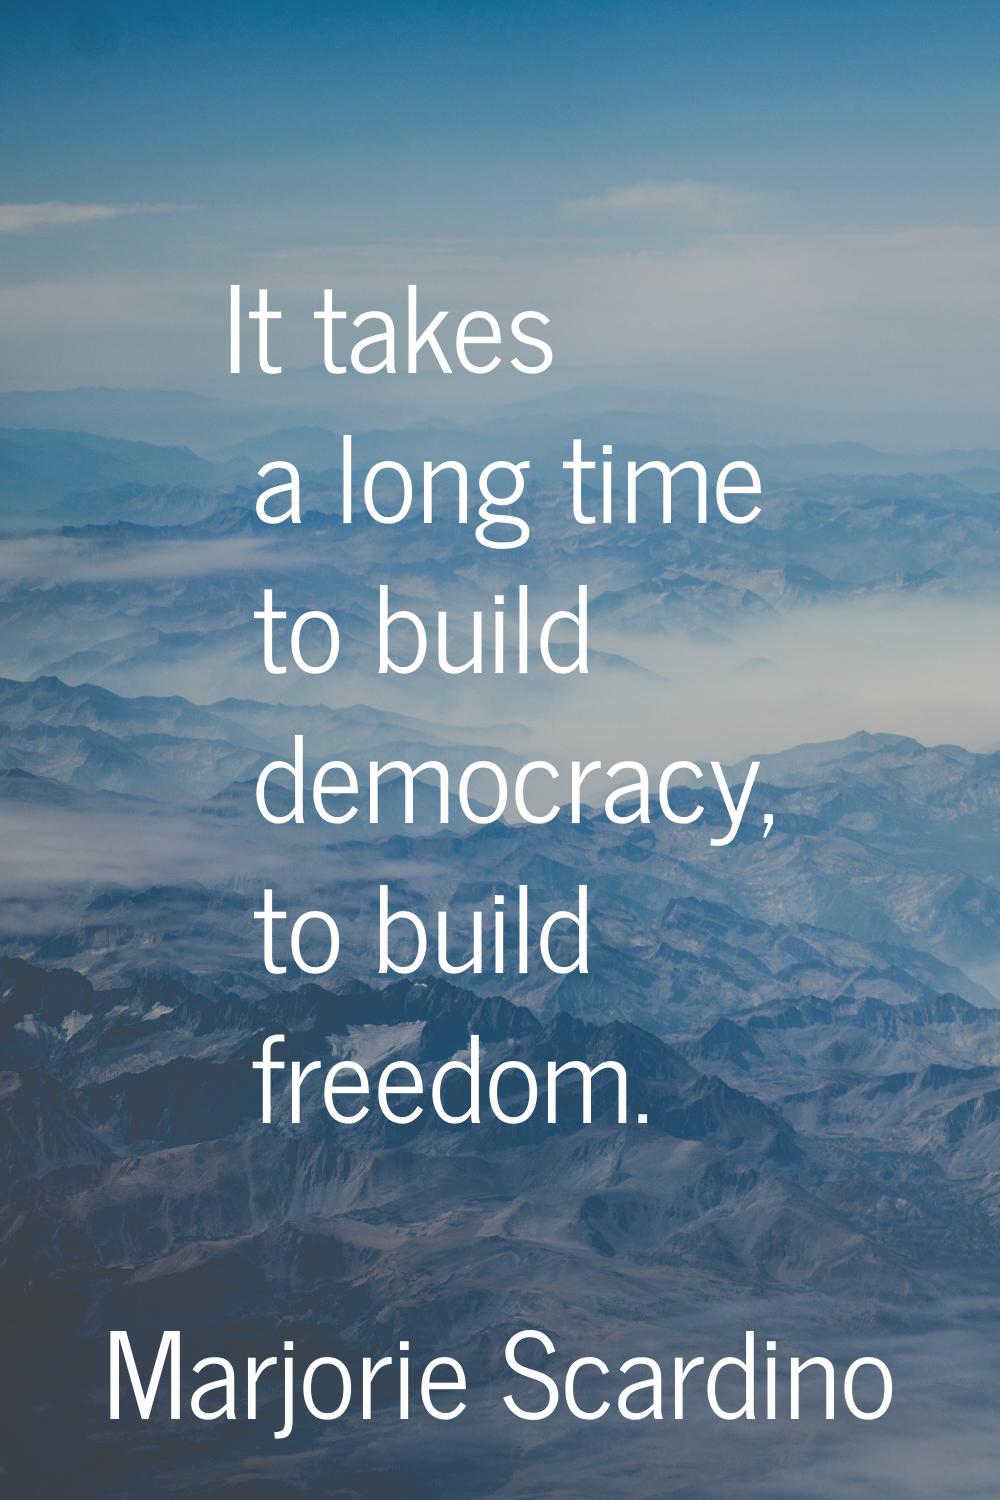 It takes a long time to build democracy, to build freedom.